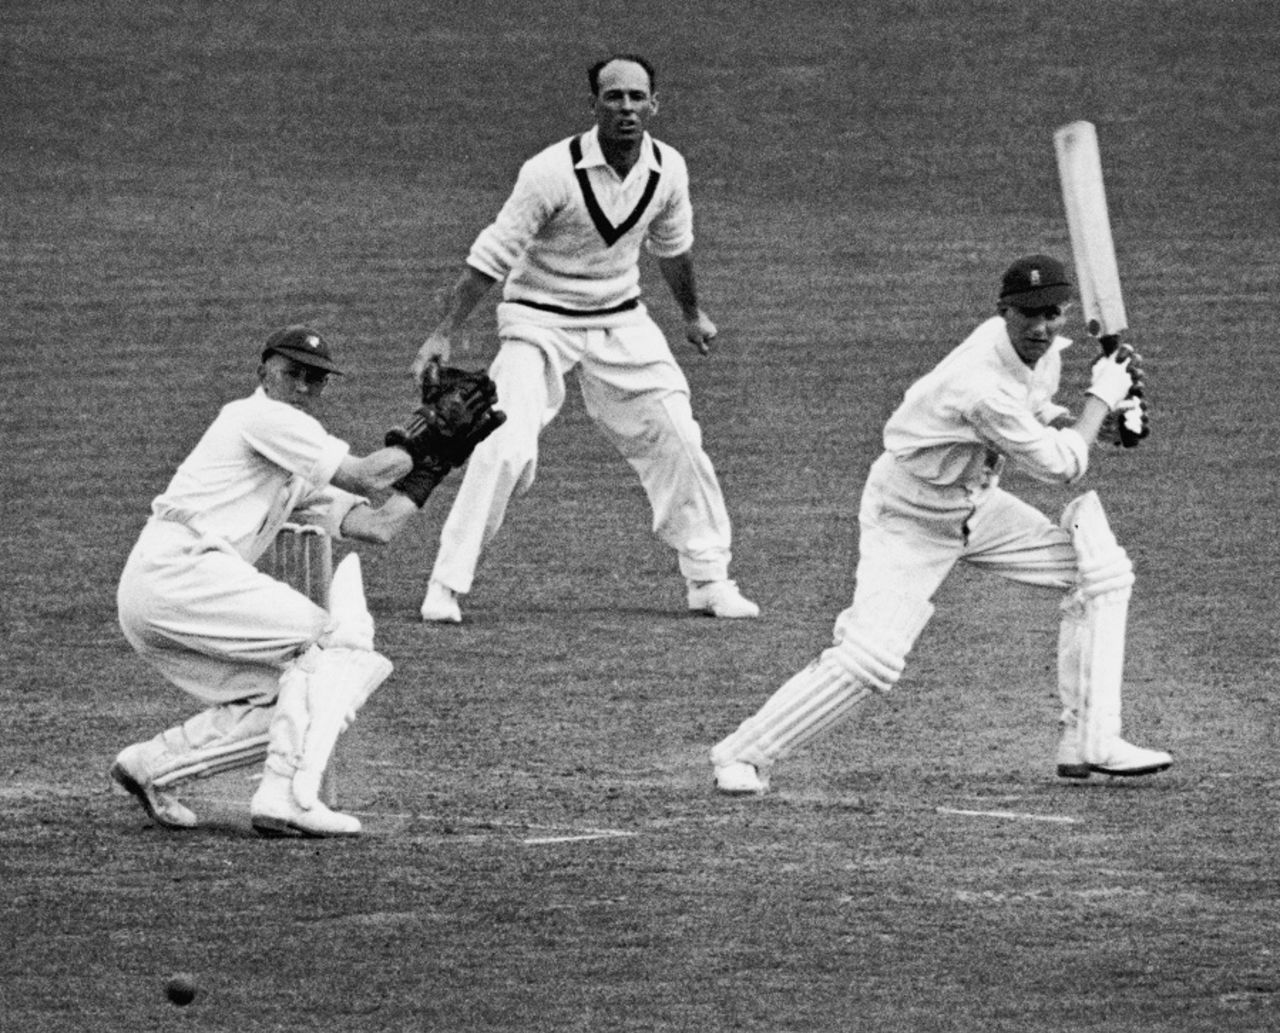 Len Hutton on his way to his record 364, England v Australia, The Oval, August 22, 1938